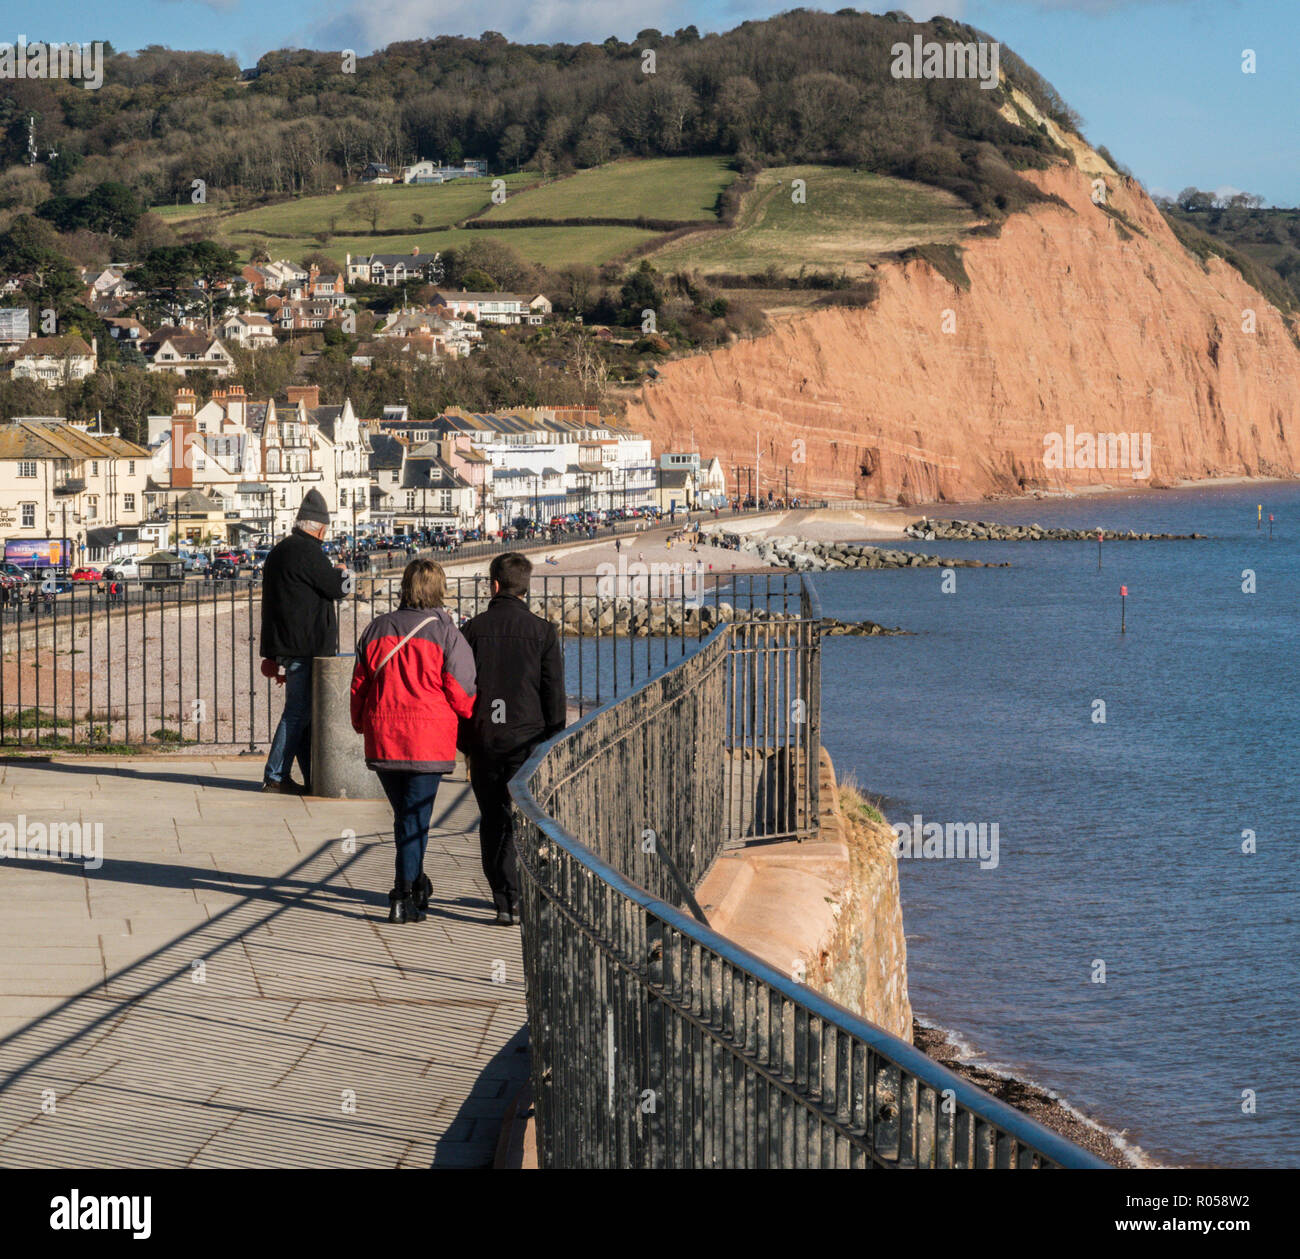 Sidmouth, Devon. 2nd Nov 2018. UK Weather: People take in the view of Sidmouth seafront from Connaught Gardens above the town. Photo Central/Alamy Live News Stock Photo